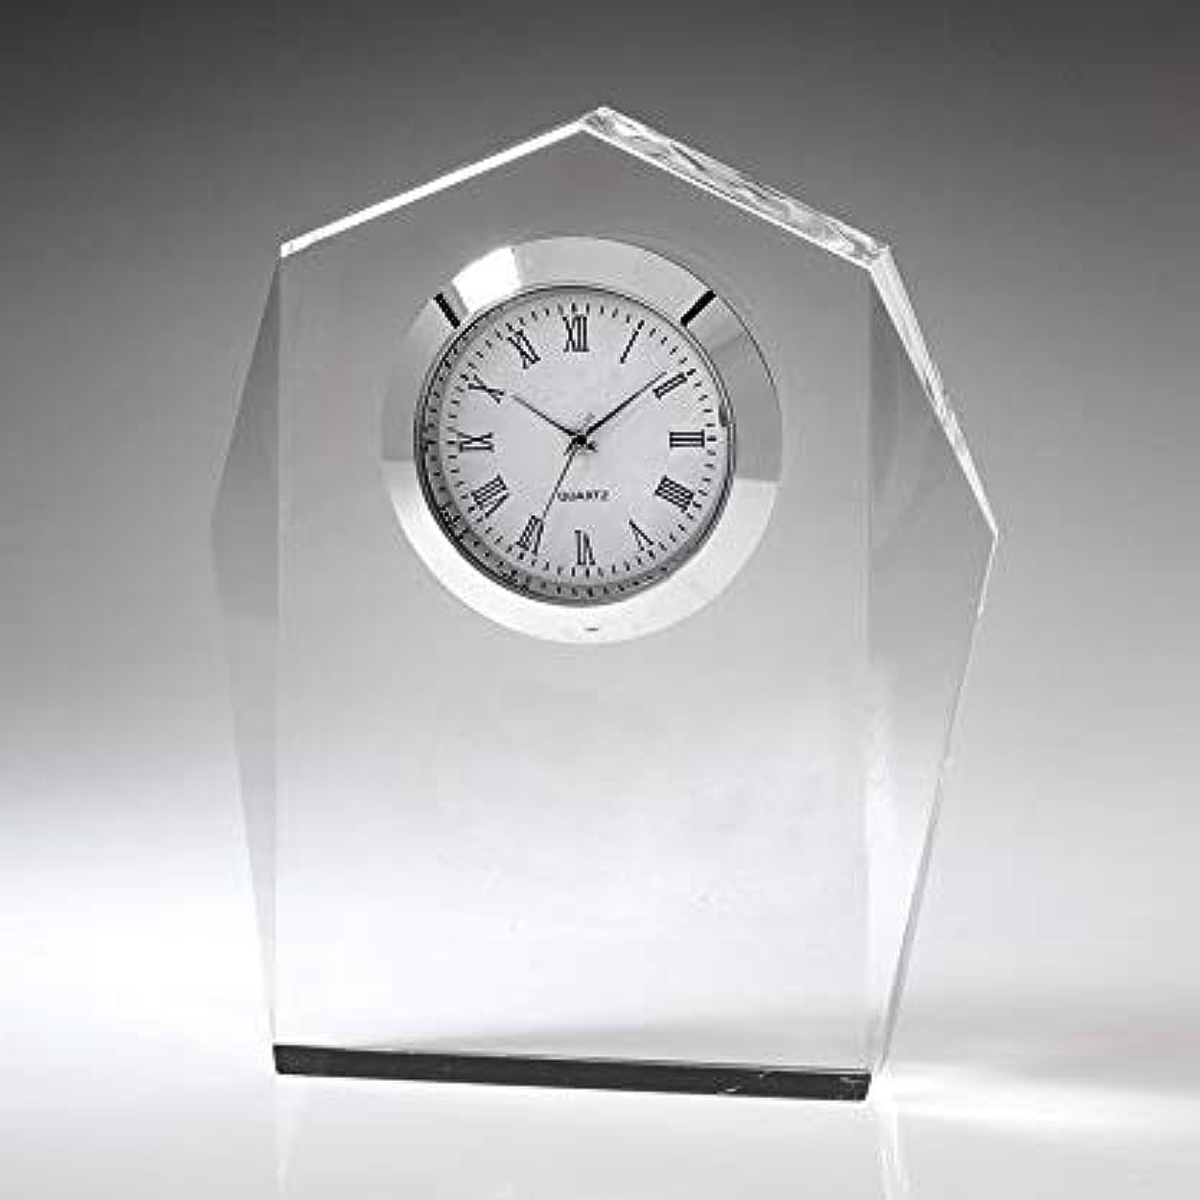 35. Timeless Elegance: Crystal-Embedded Desktop Clock - The Perfect 15 Year Anniversary Gift